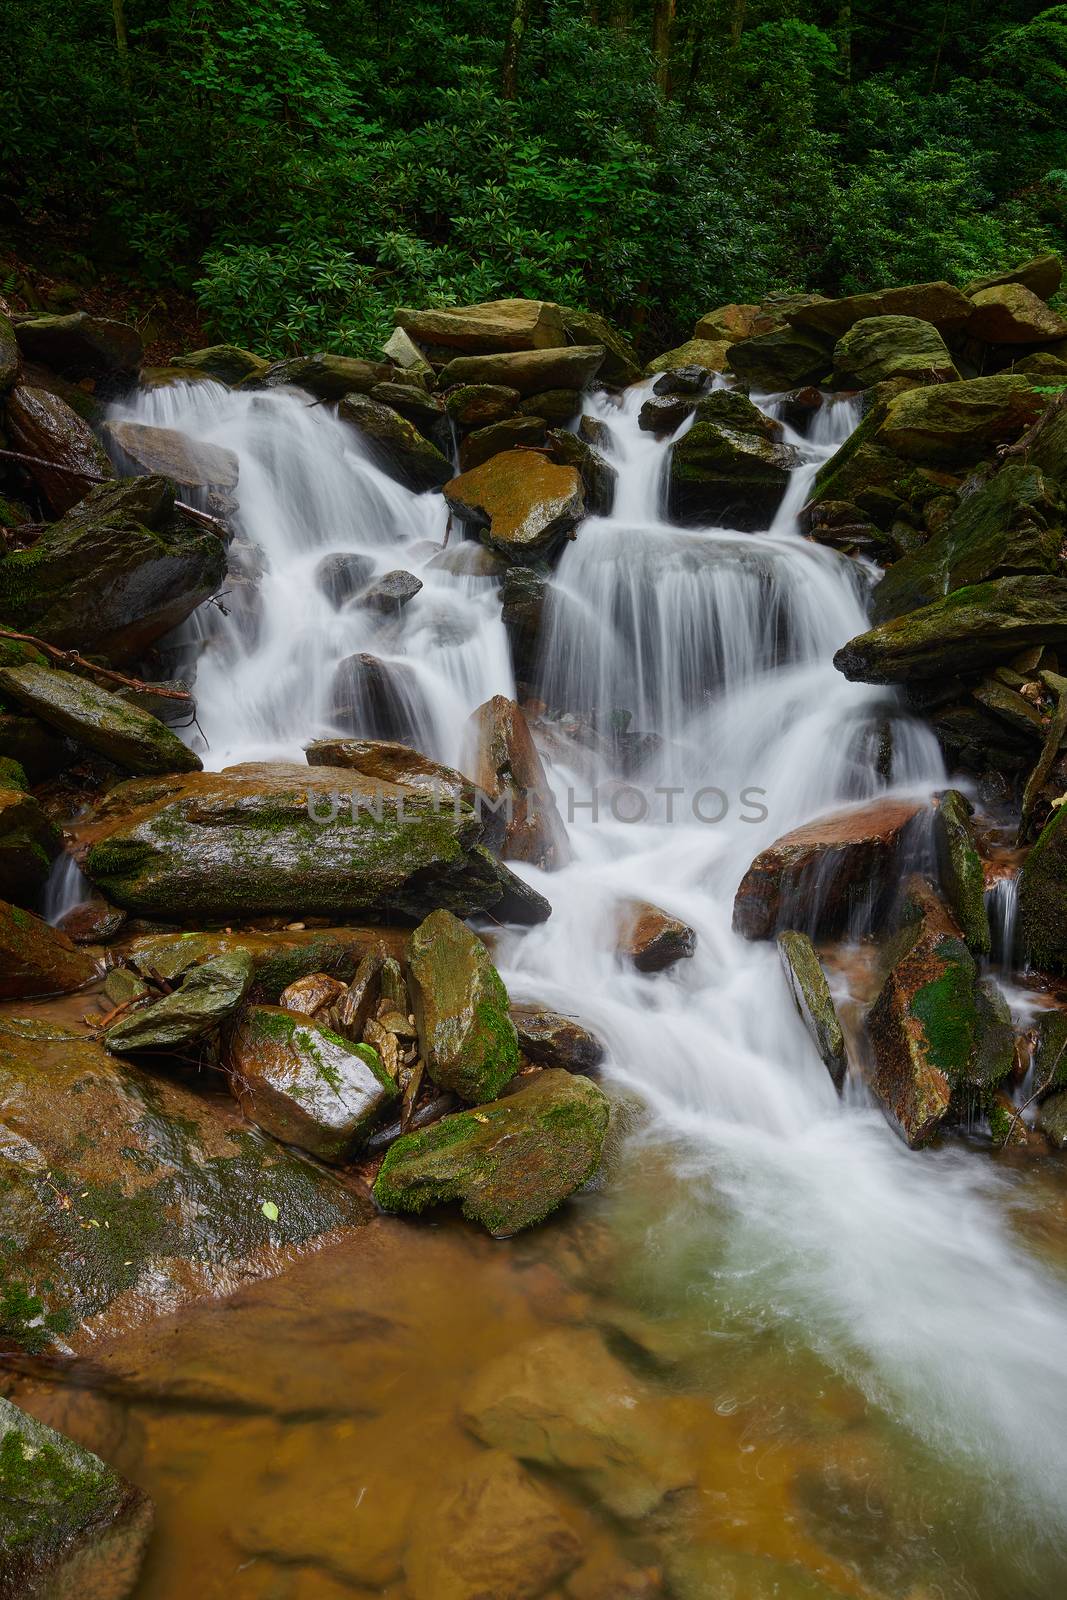 Waterfall pouring over rocks in Pisgah National Forest, NC. by patrickstock